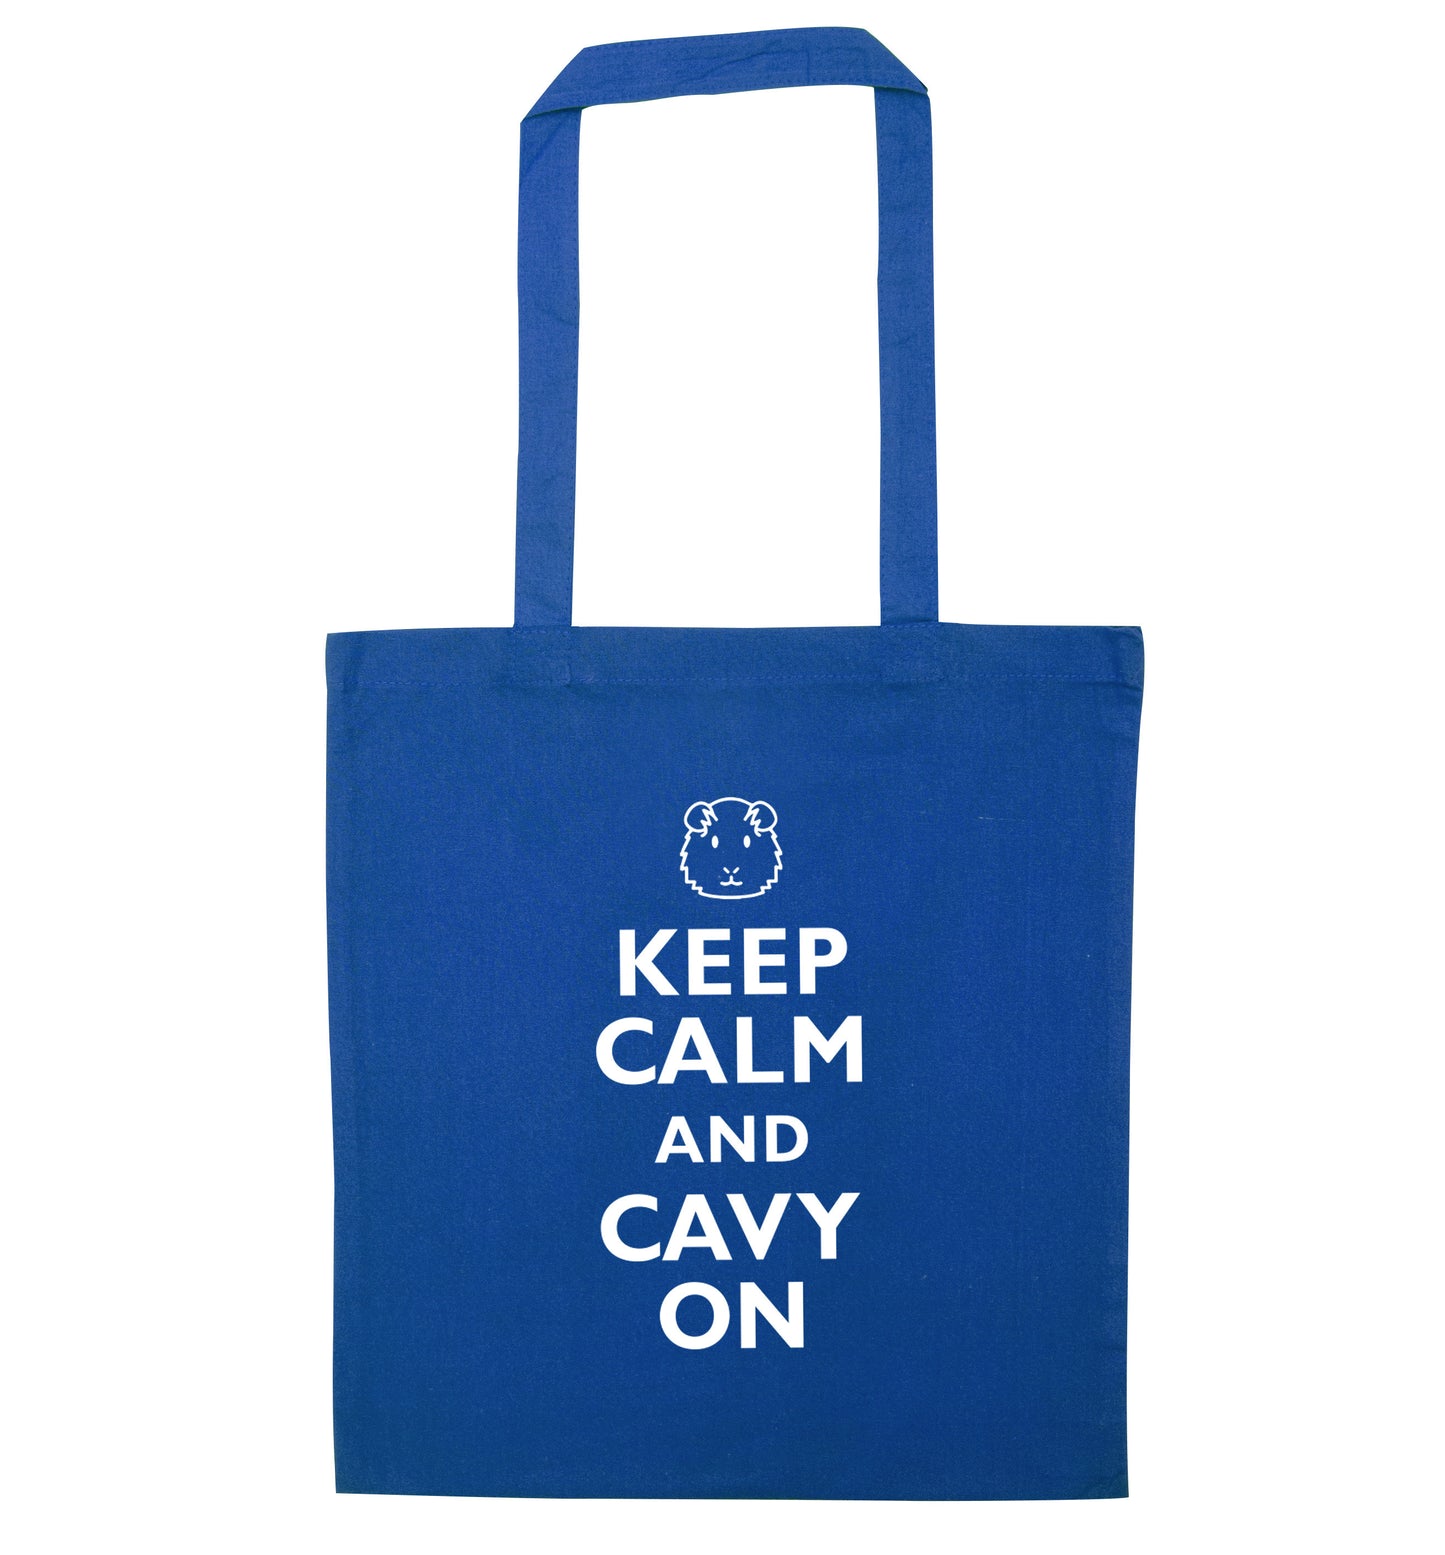 Keep calm and cavvy on blue tote bag